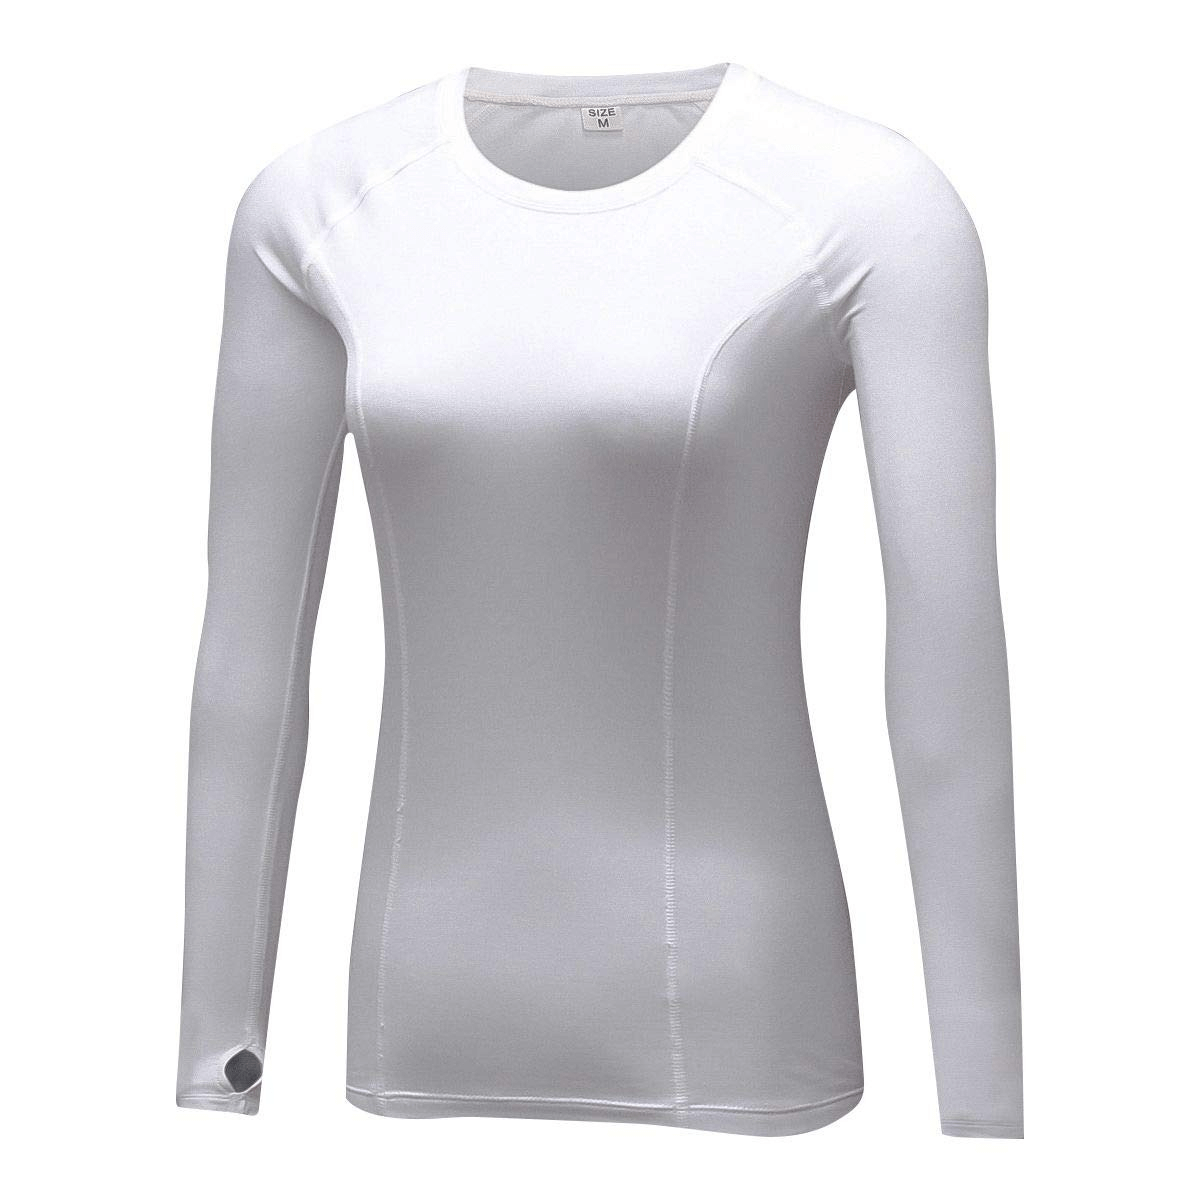 Thumb Hole Design Running Warm Top / Compression Women's Fitness Clothes - SF0057